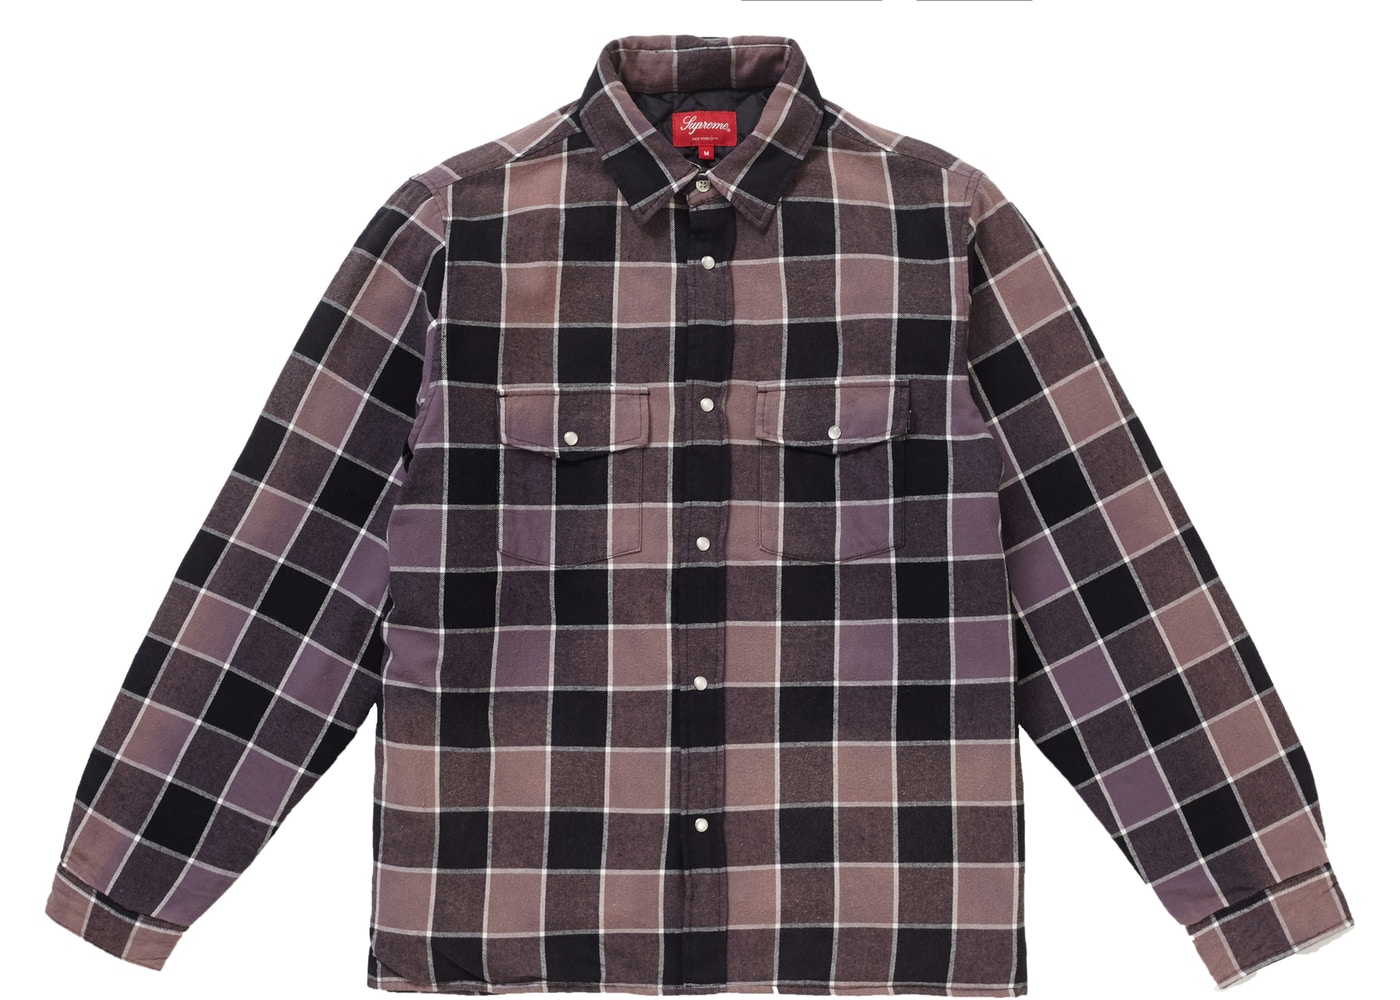 2018 Supreme Quilted Faded Plaid Shirt Black | Jwong Boutique